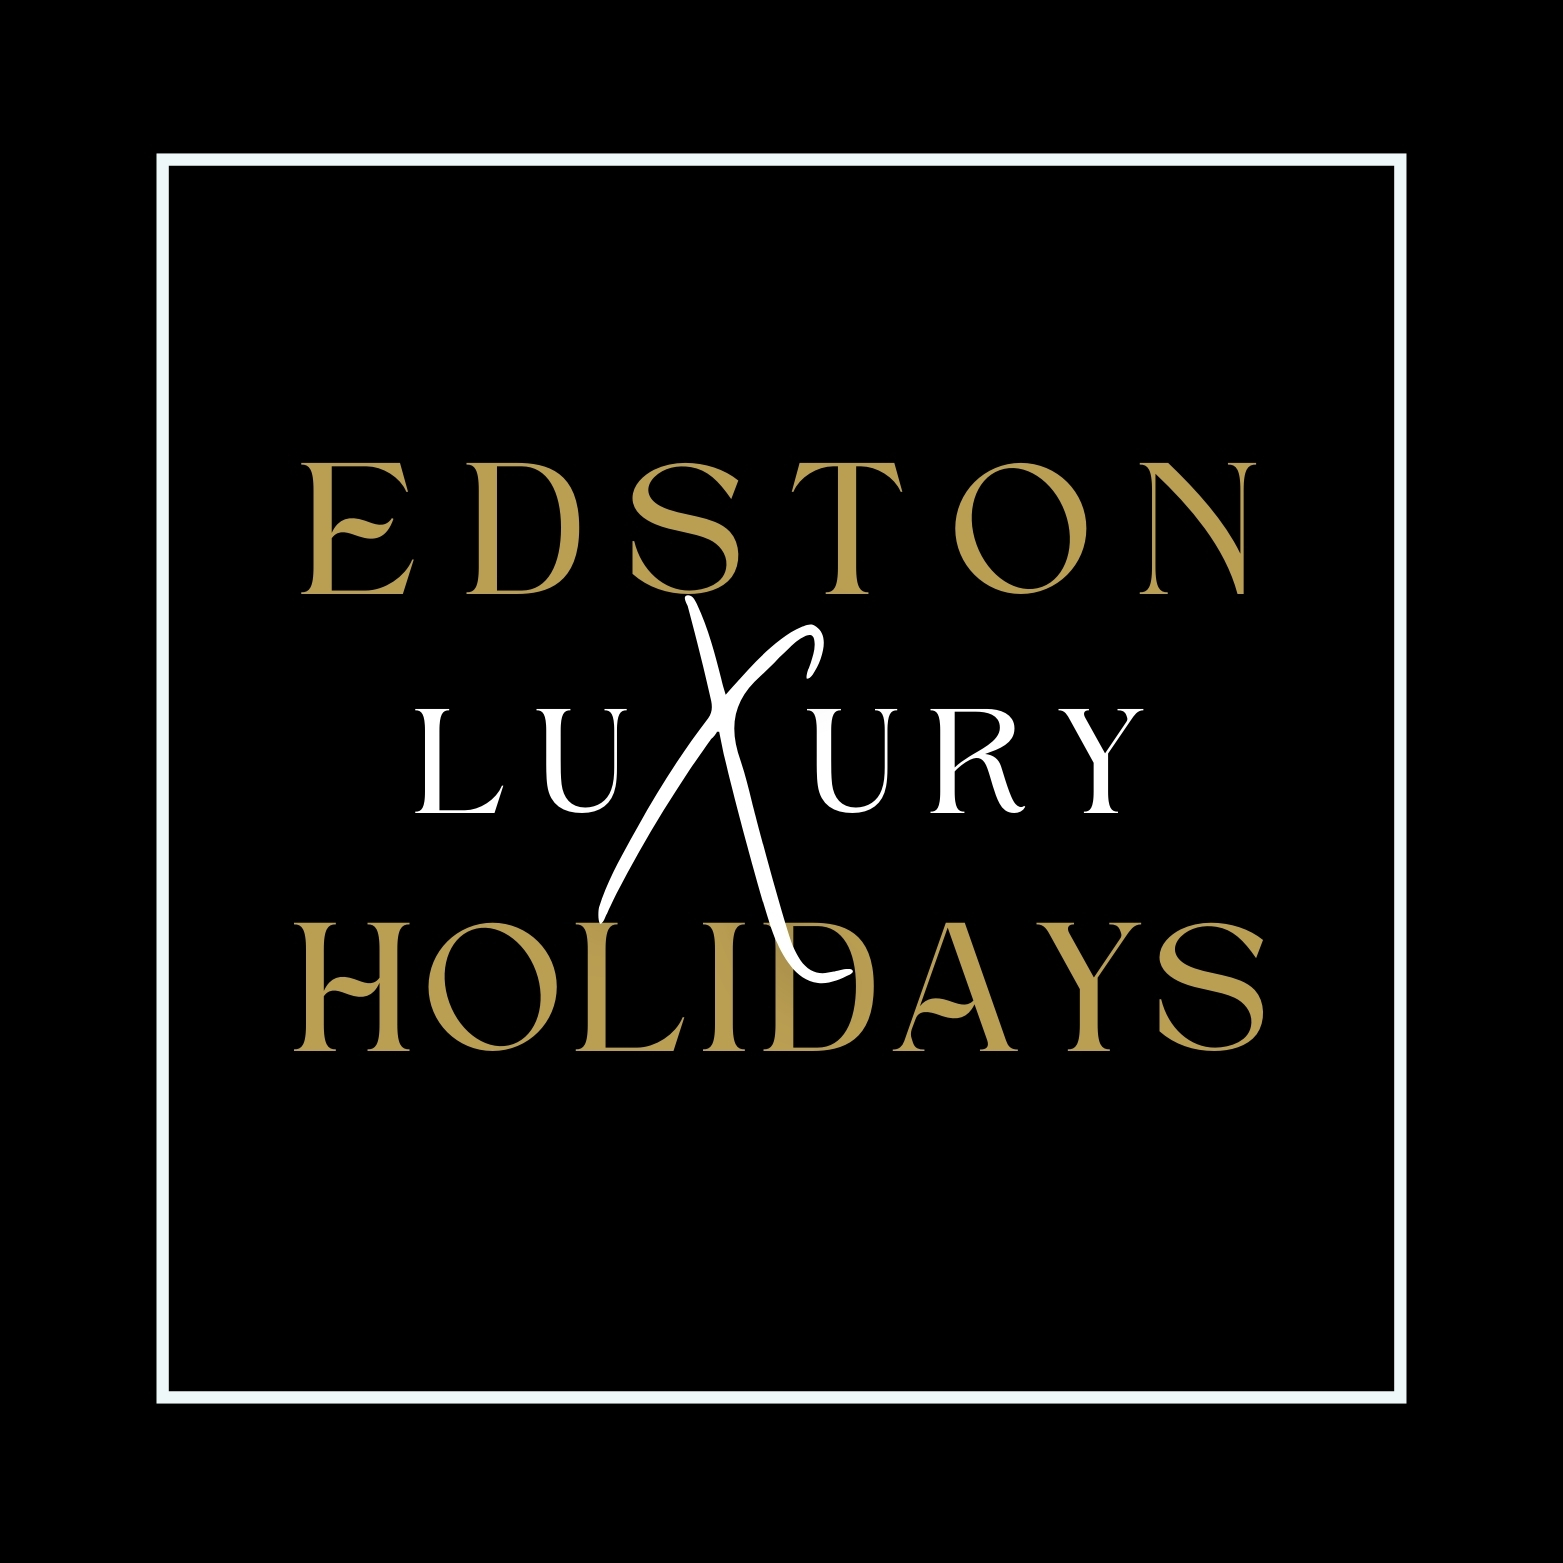 Black background, white box outline, inside the box are the words Edston Luxury Holidays in gold and white type